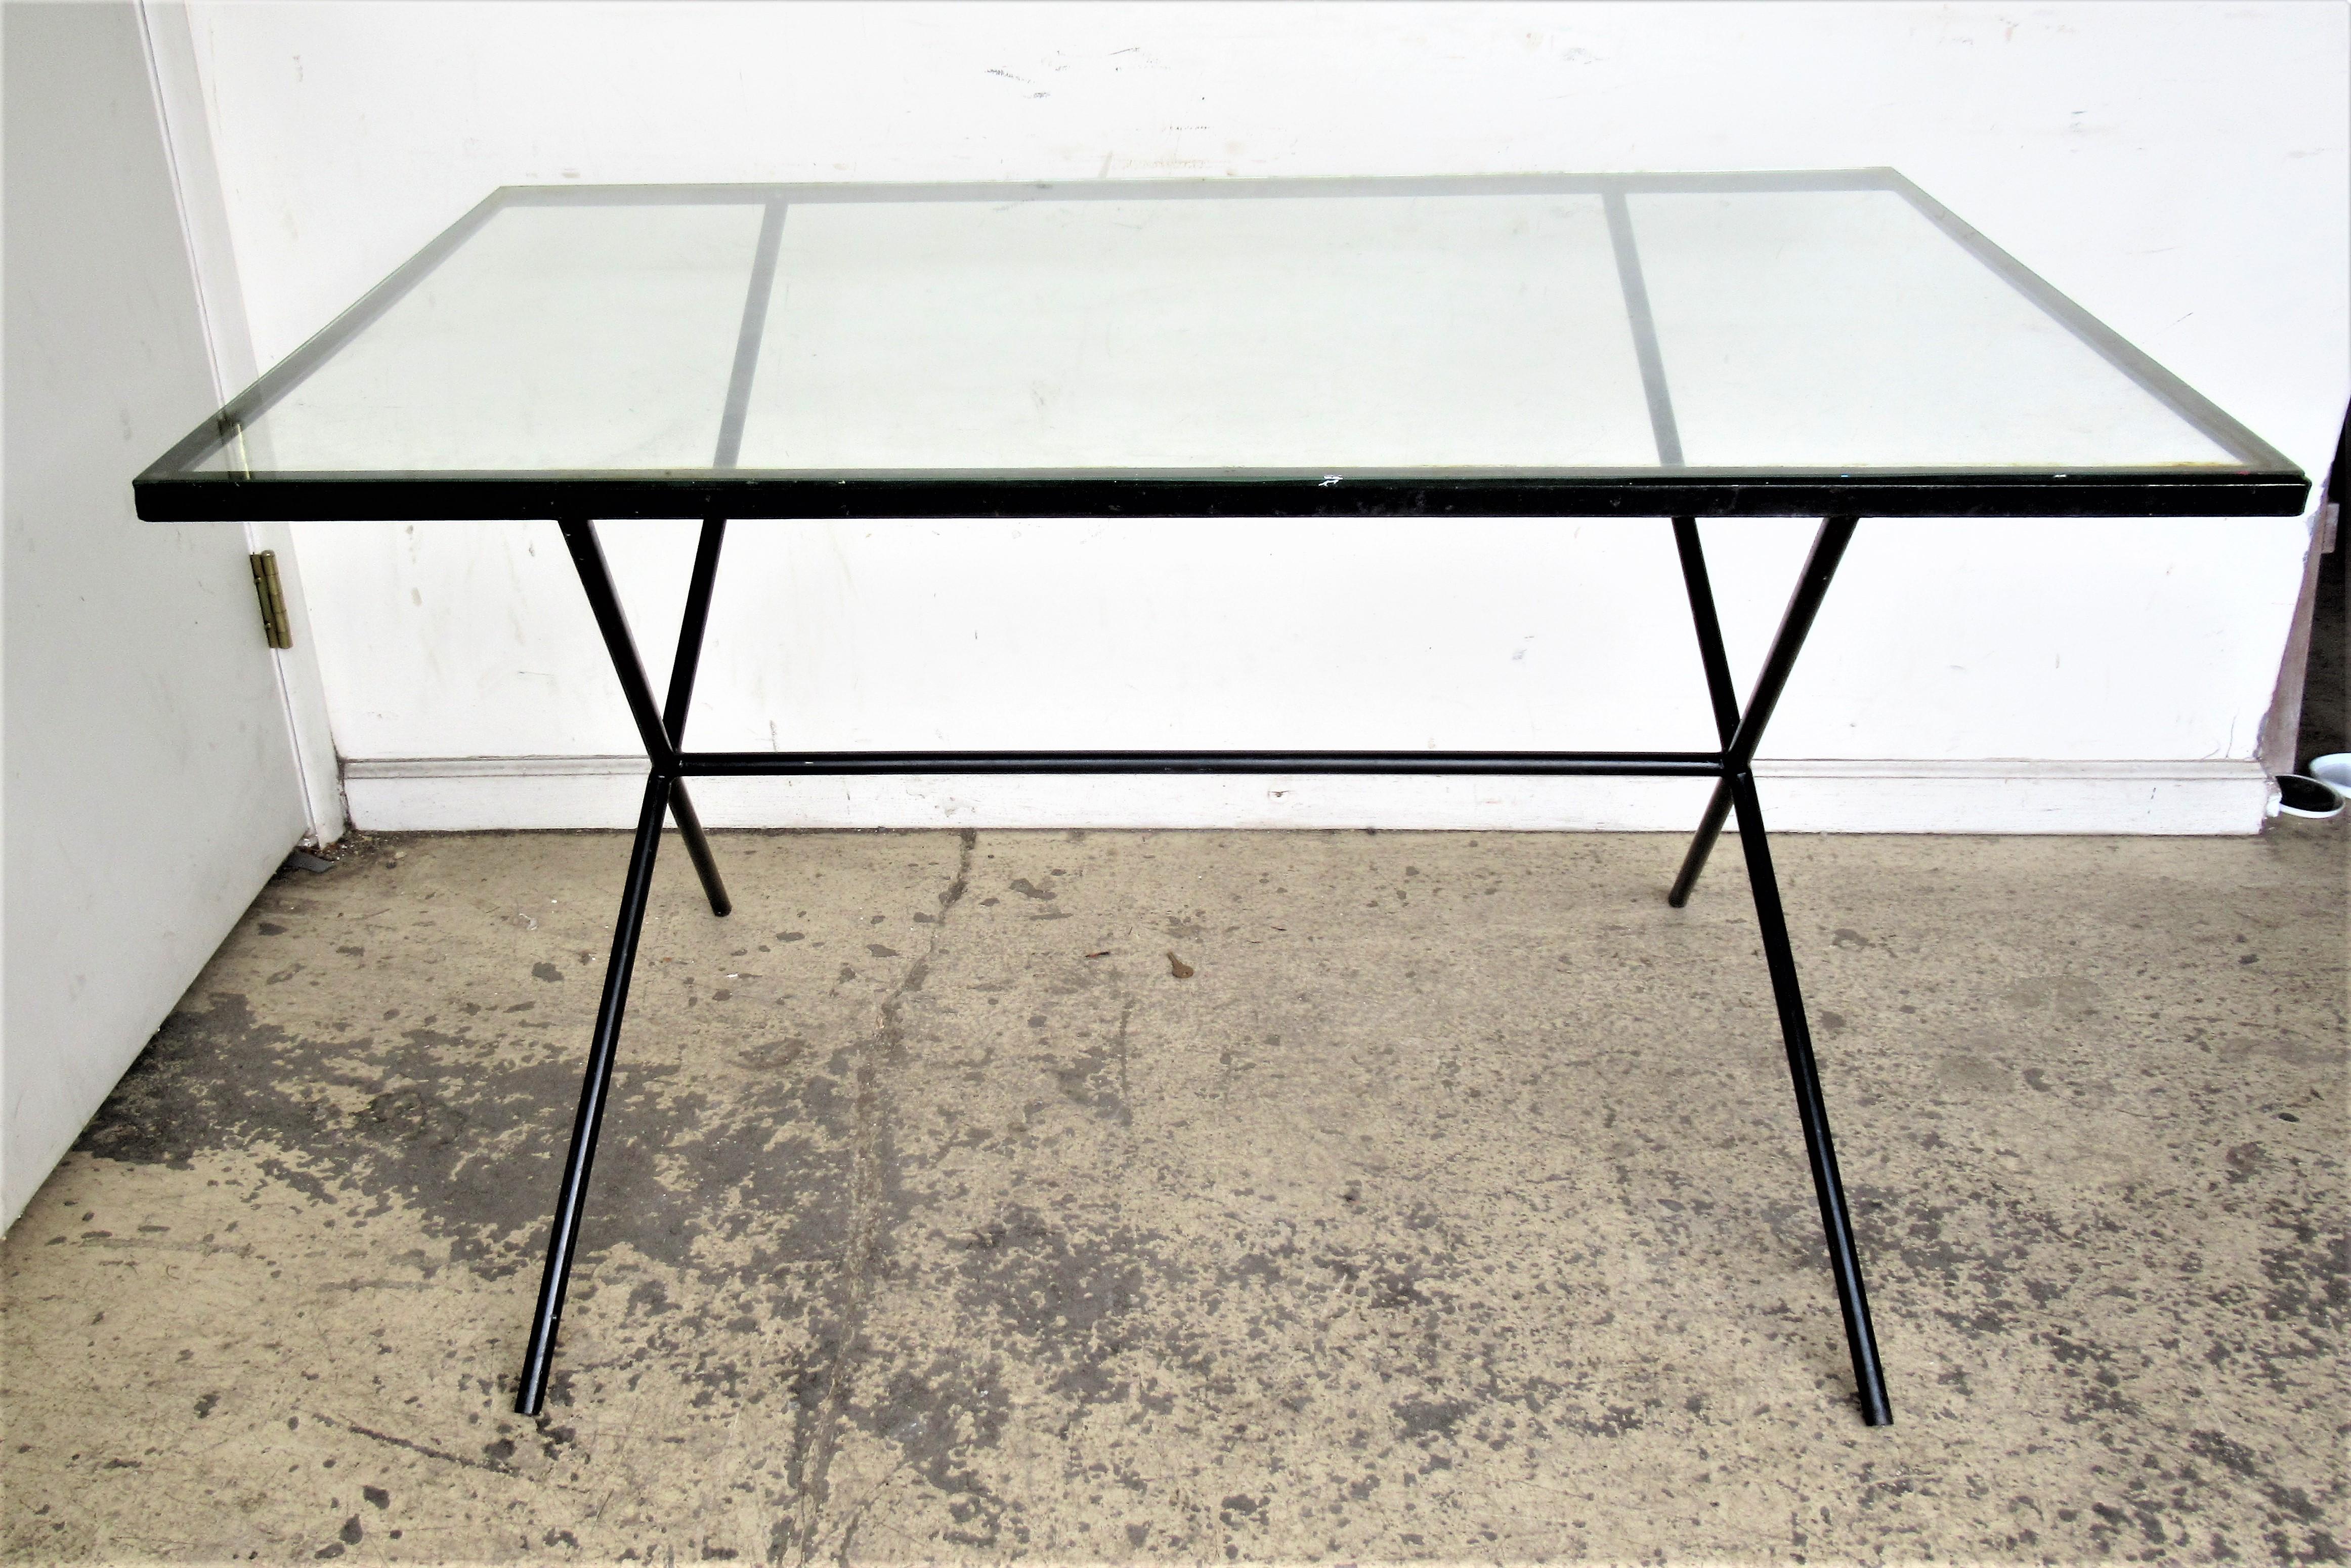  Architectural Modernist Iron Table by Muriel Coleman 4